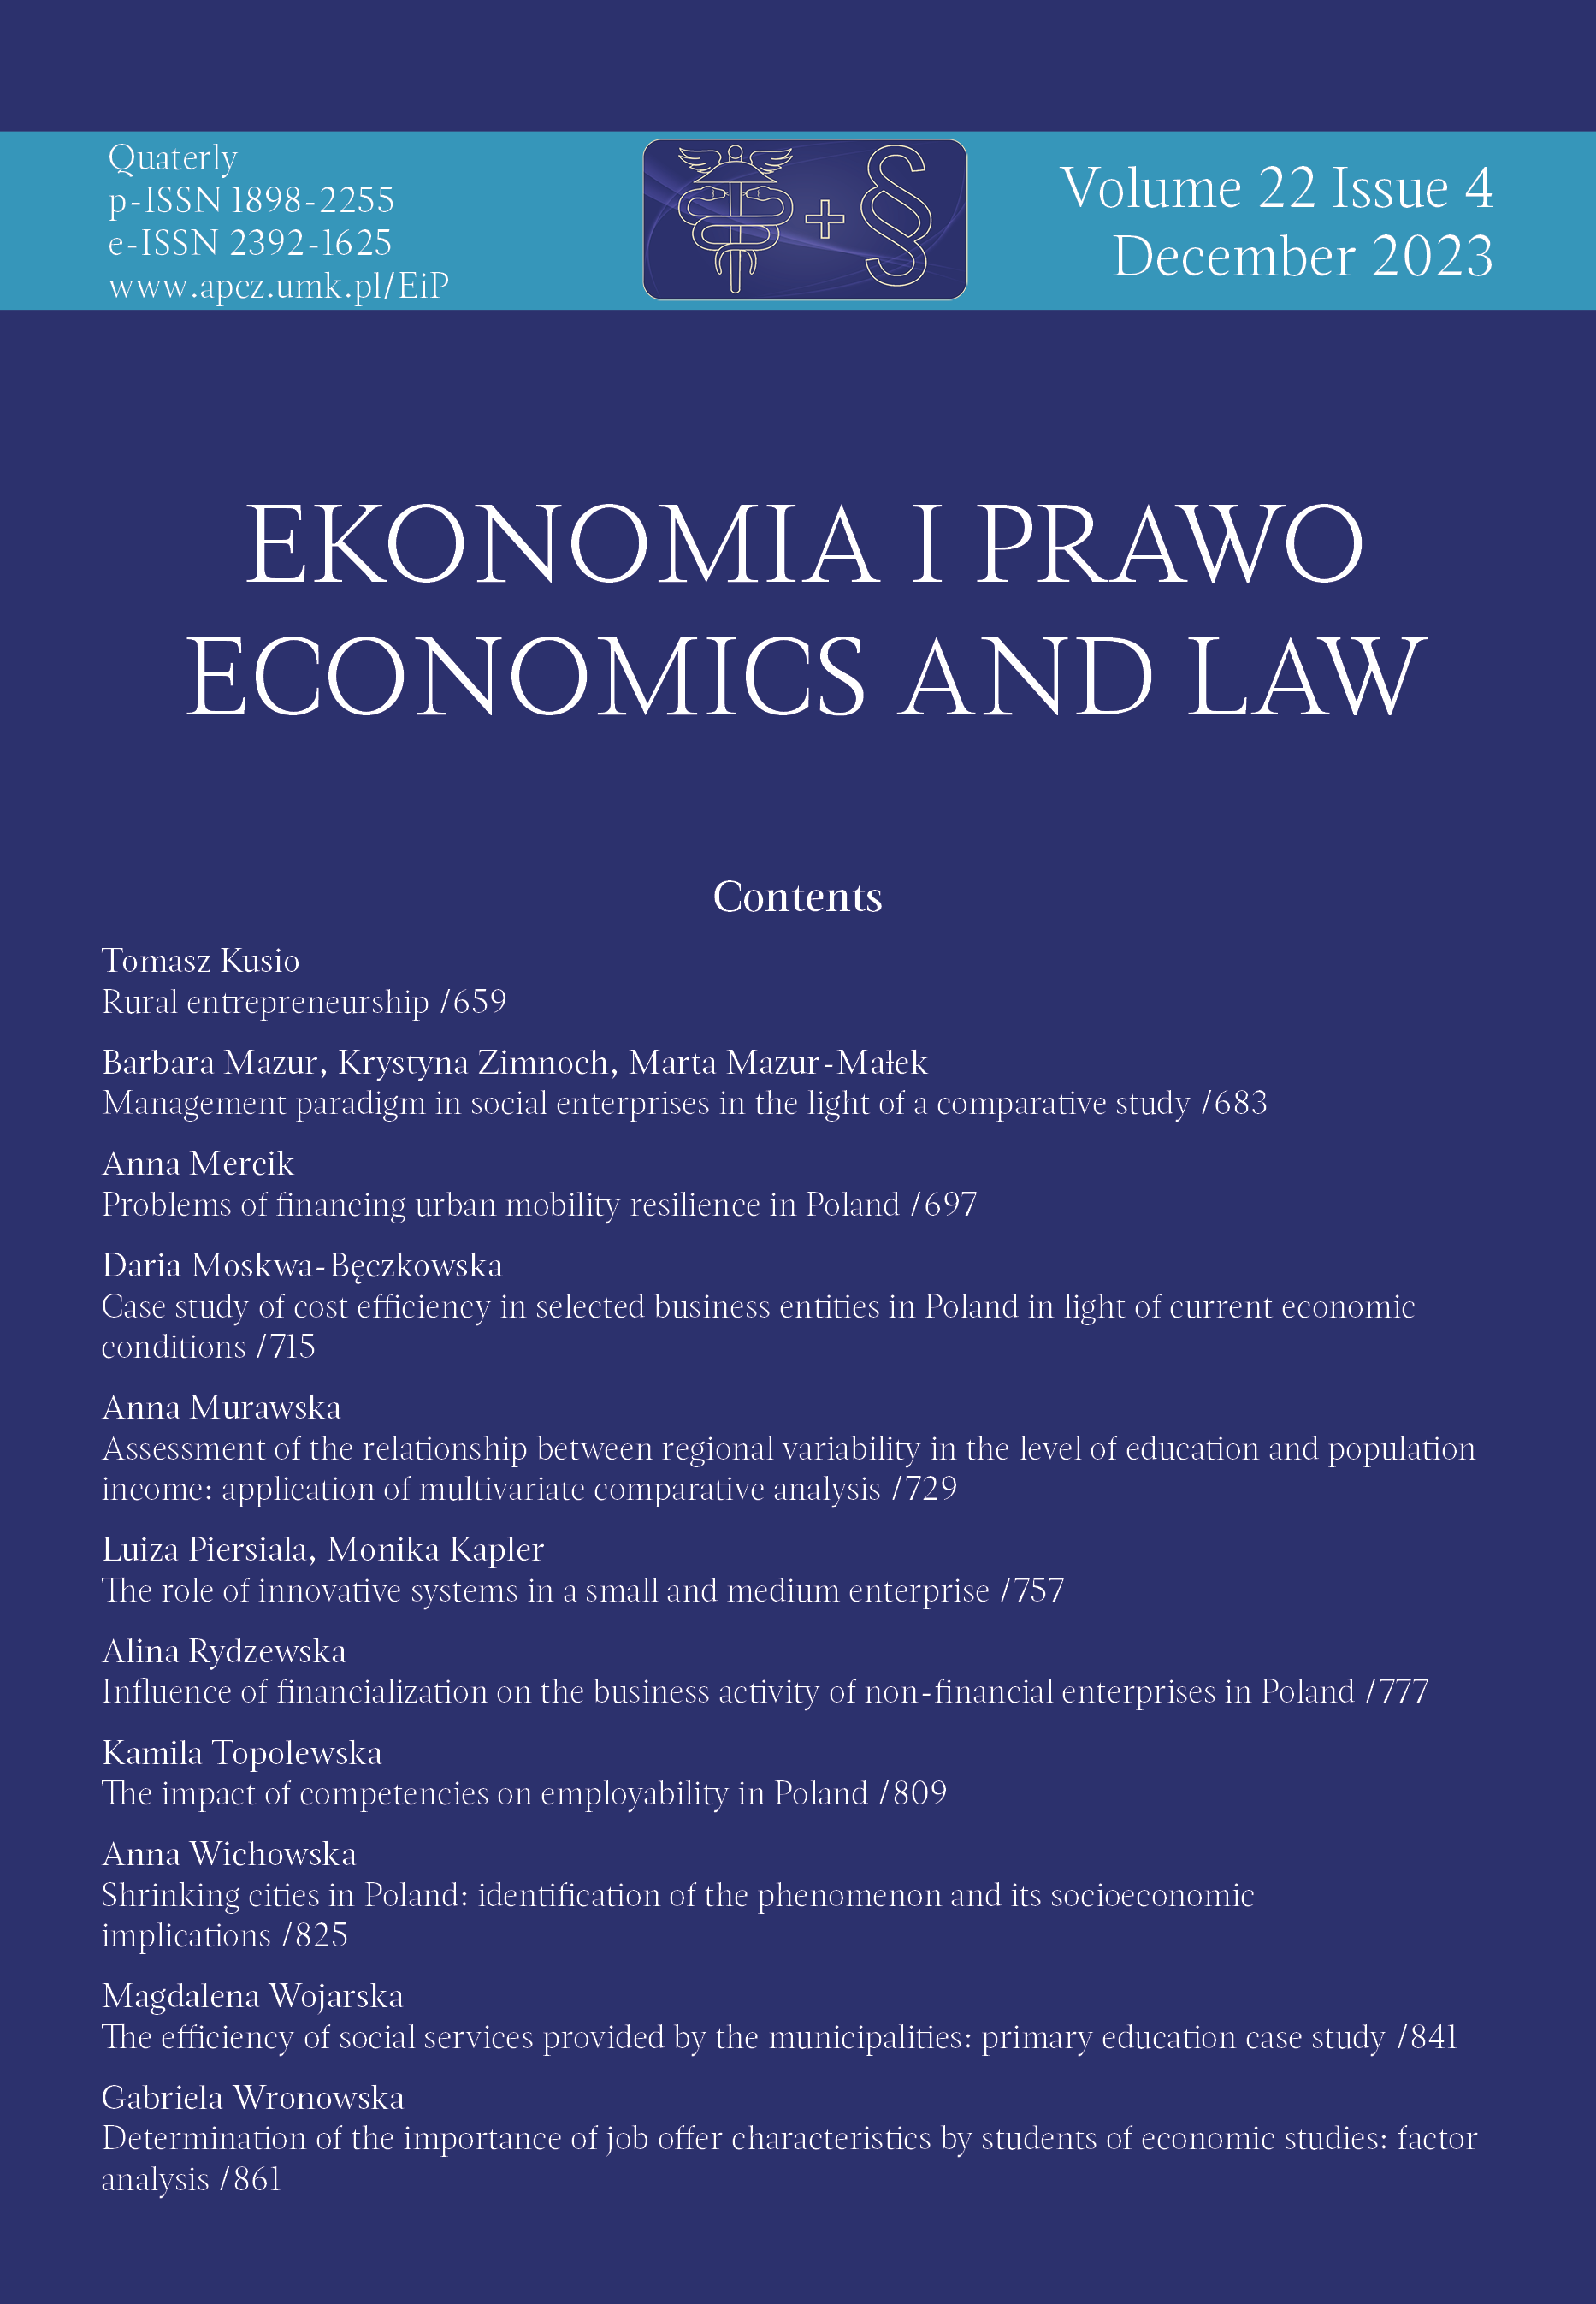 Shrinking cities in Poland: identification
of the phenomenon and its
socioeconomic implications Cover Image